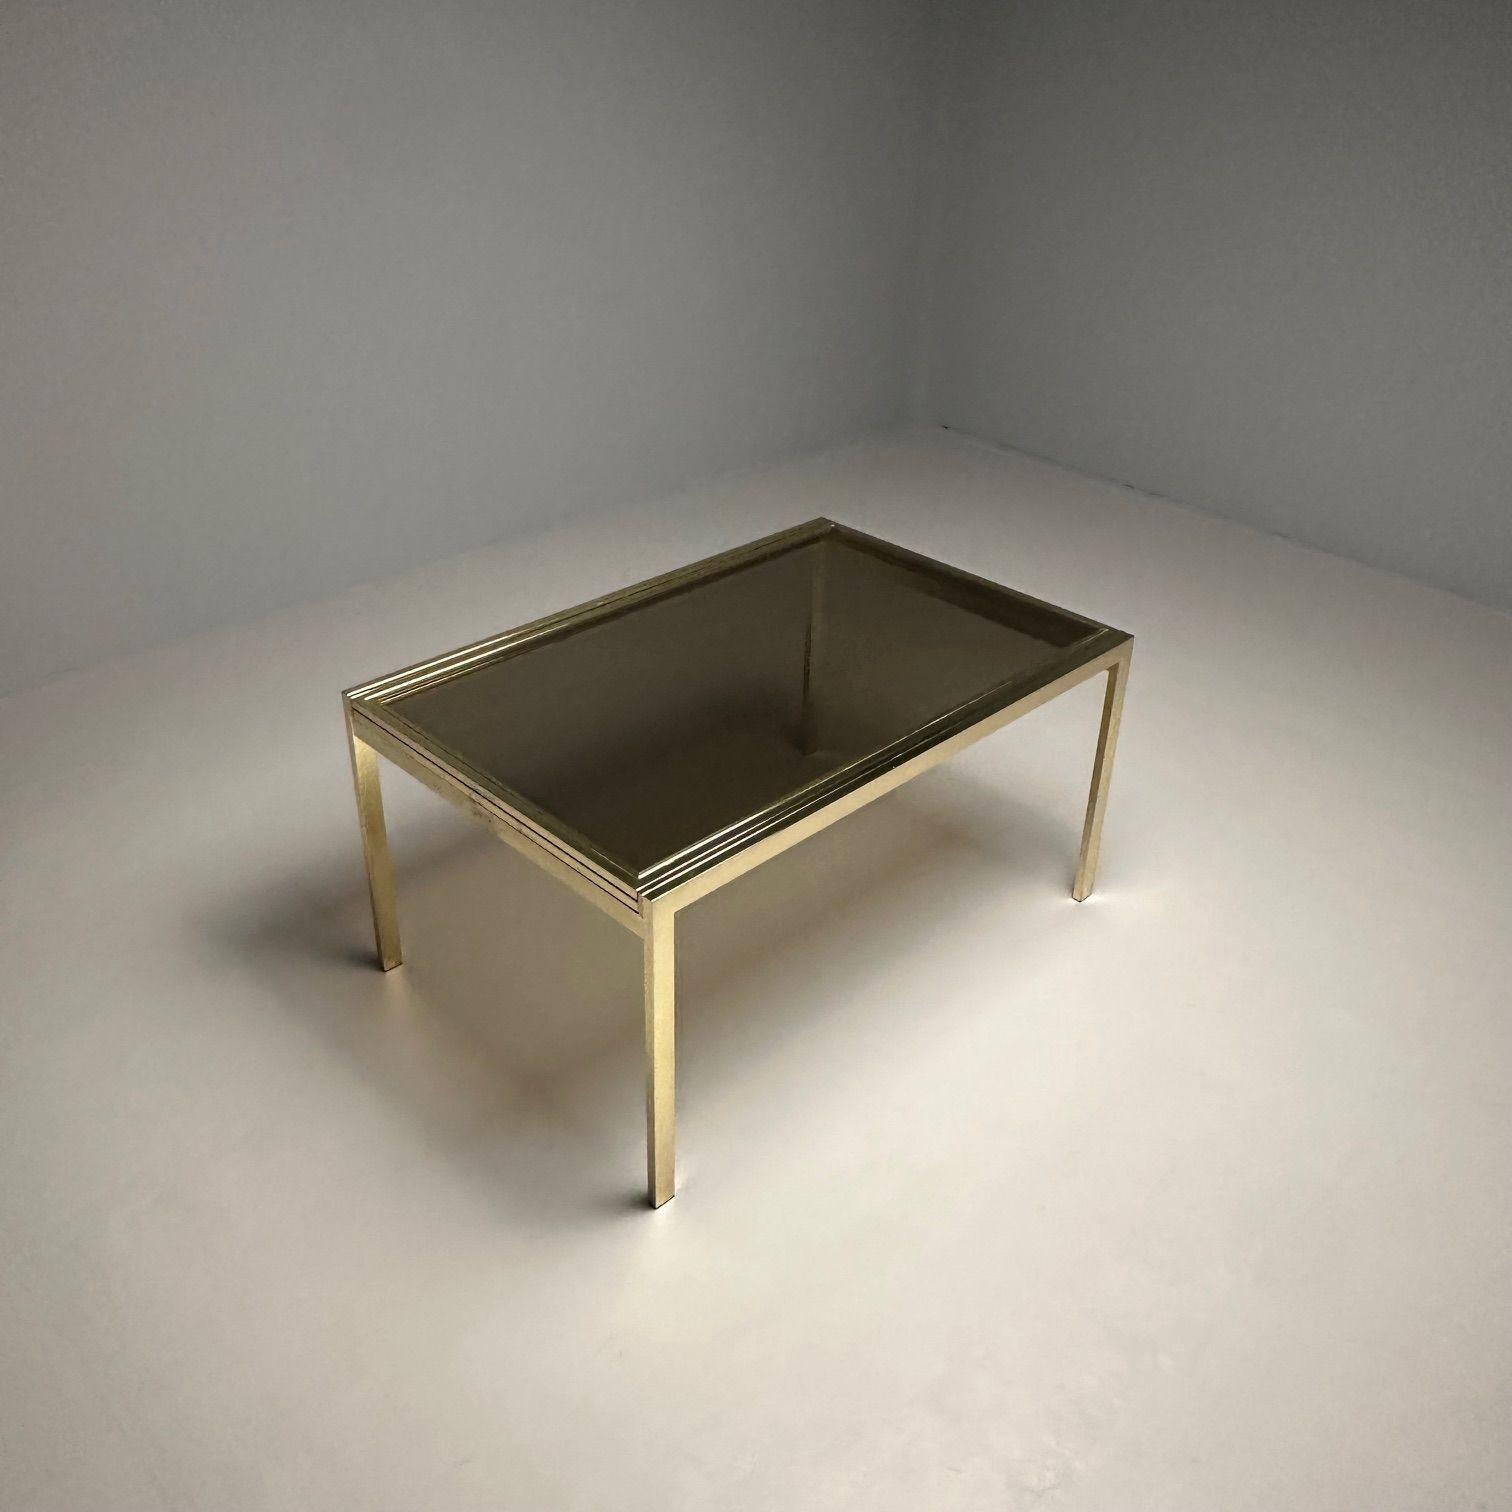 20th Century Milo Baughman, DIA, Mid-Century Modern Dining Table, Smoked Glass, Brass, Canada For Sale